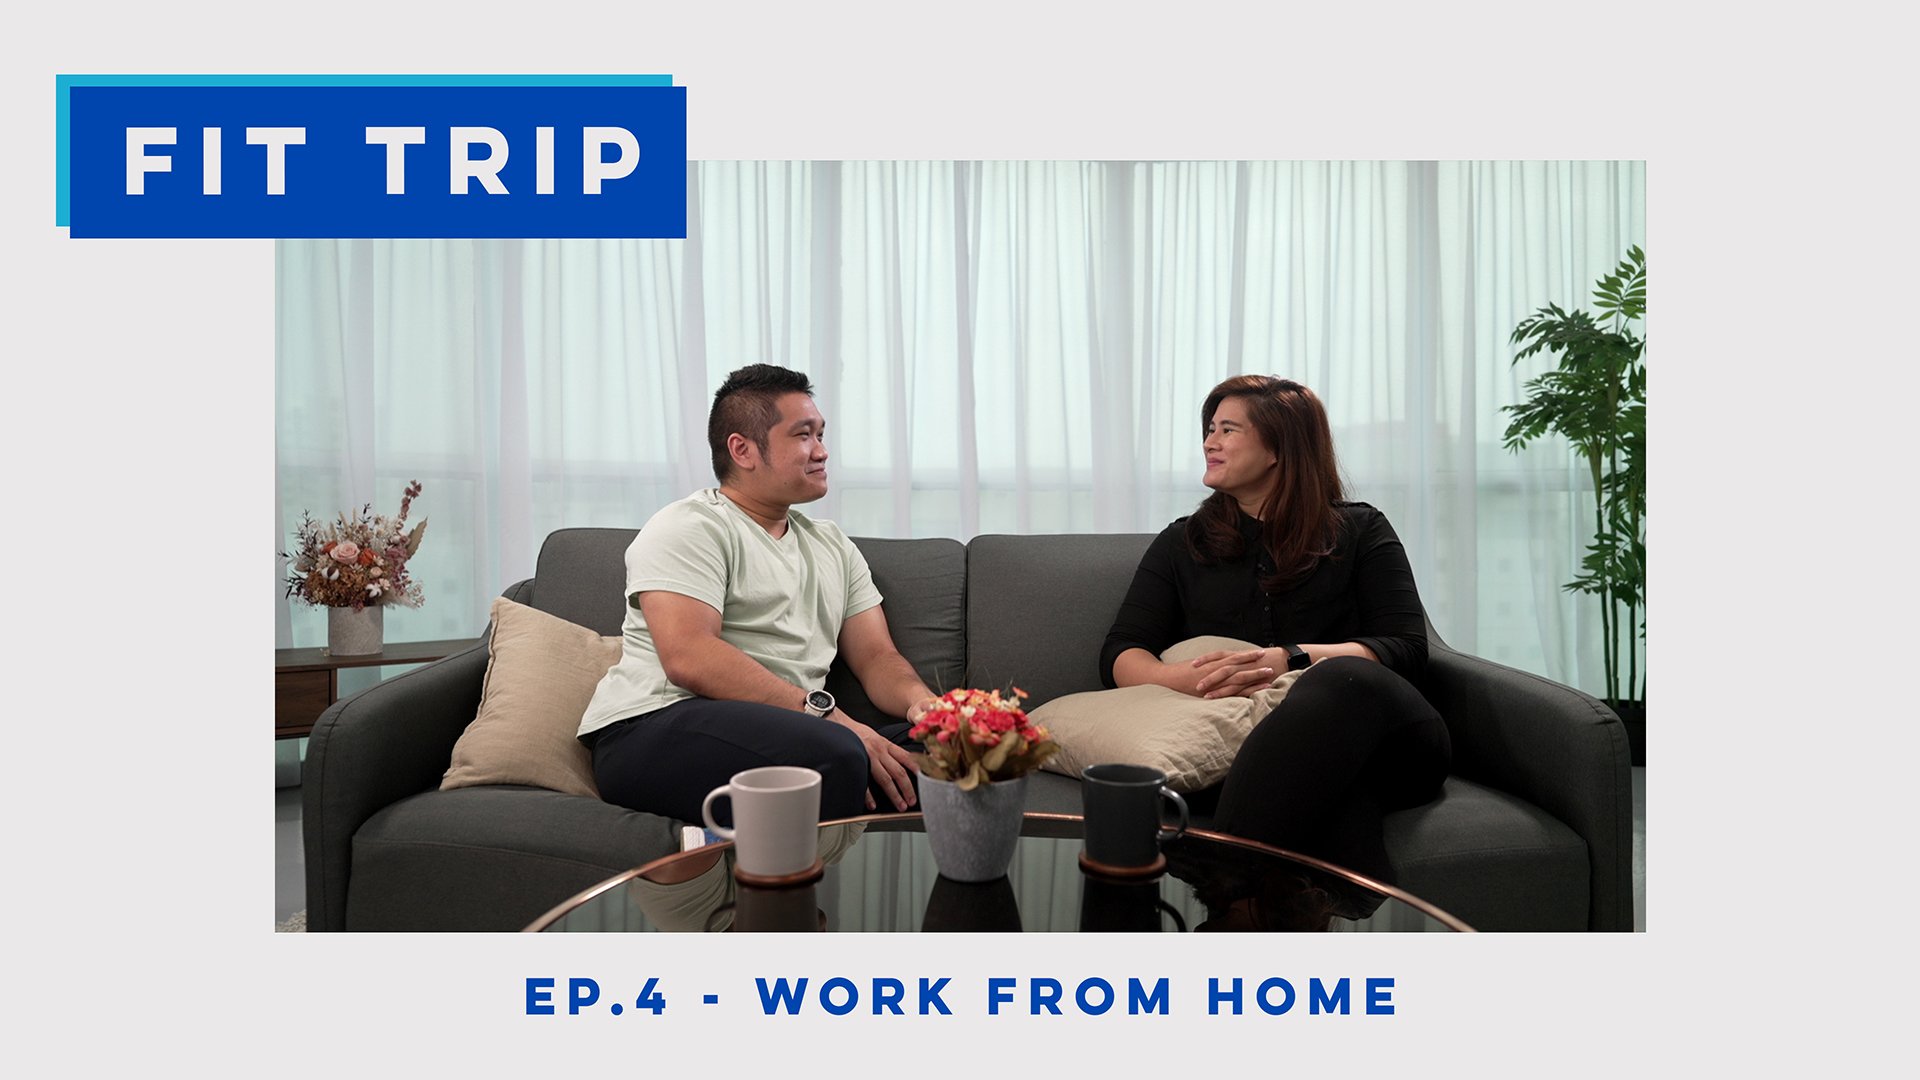 FitTrip Ep. 4 - Work from Home